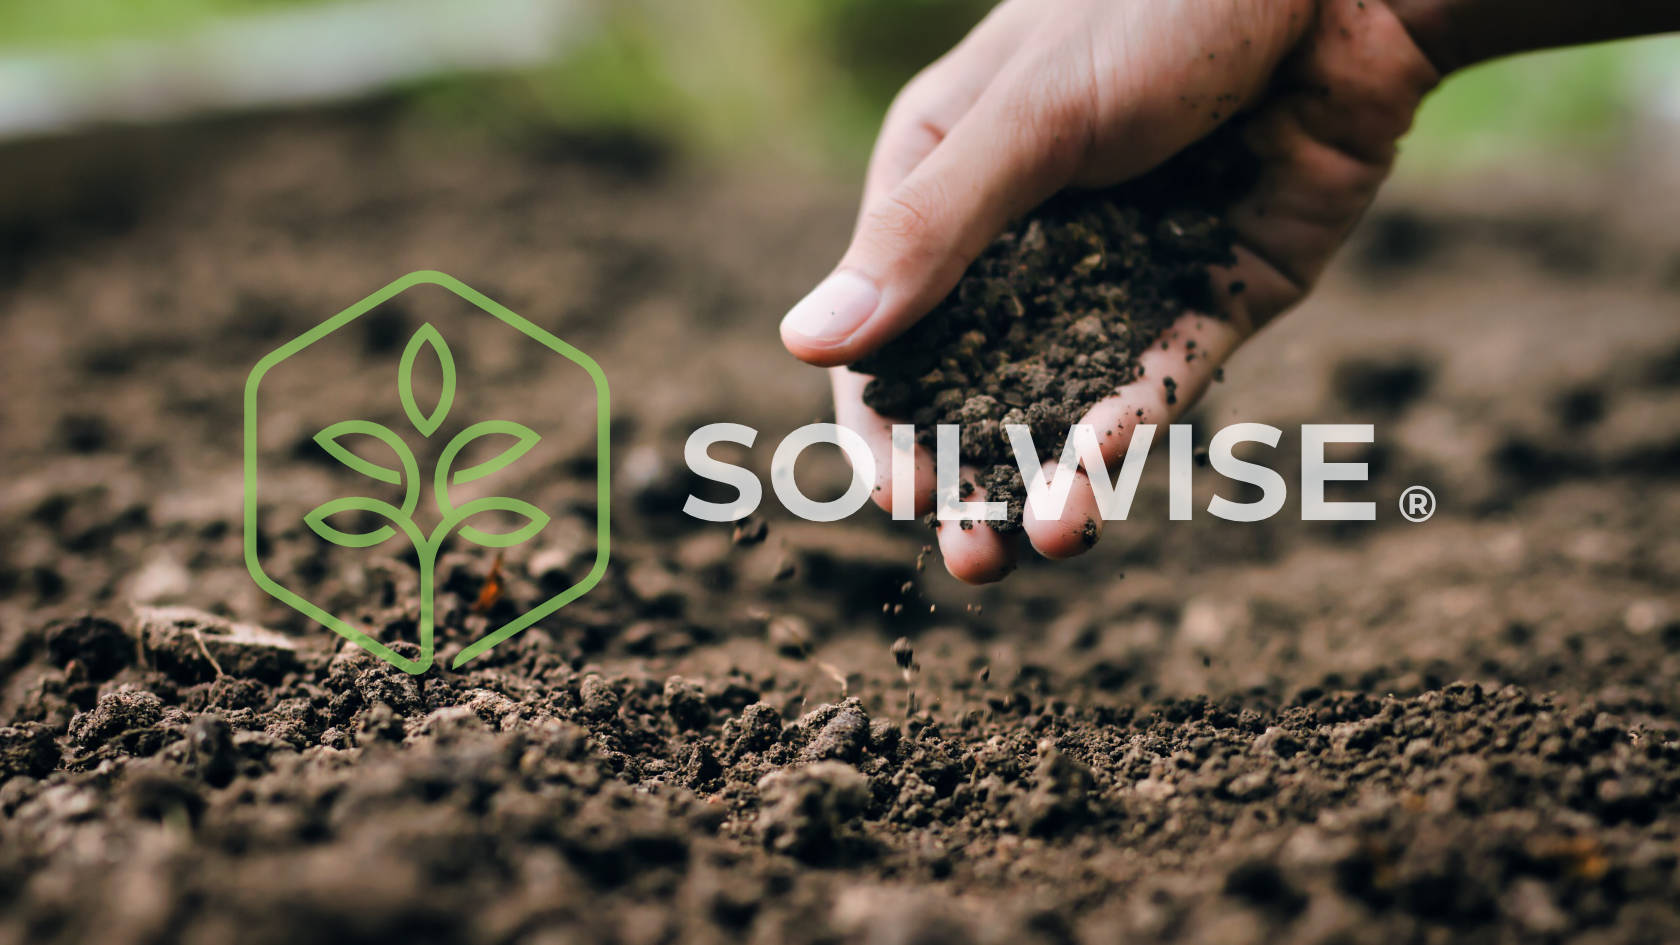 Soilwise - our new brand name and identity